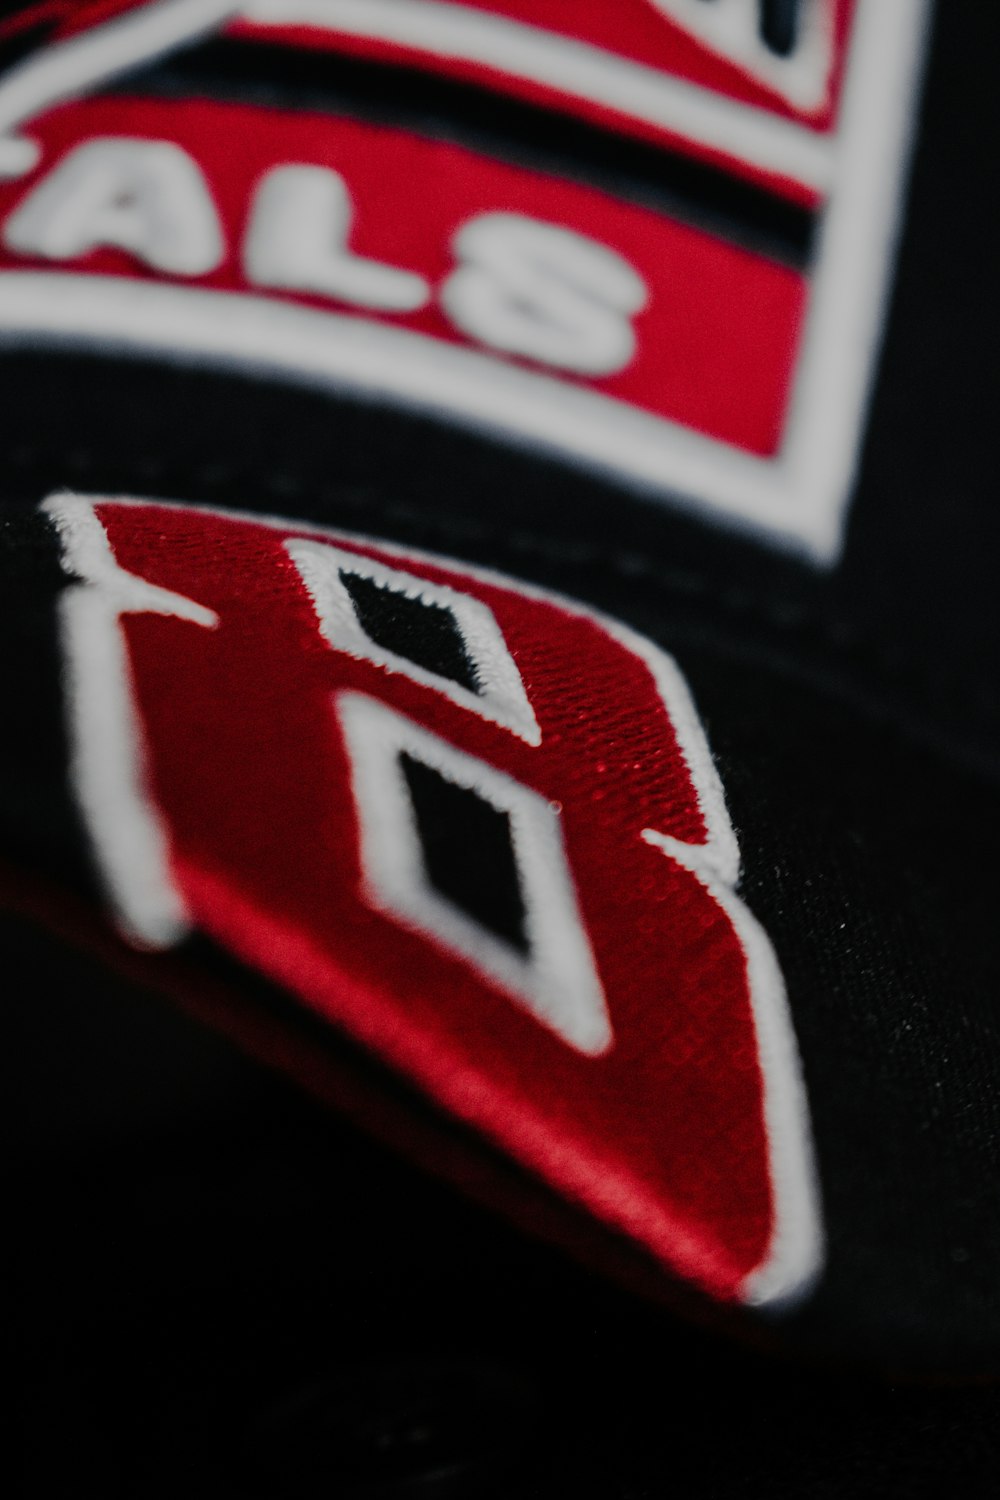 a close up of a baseball cap with a logo on it